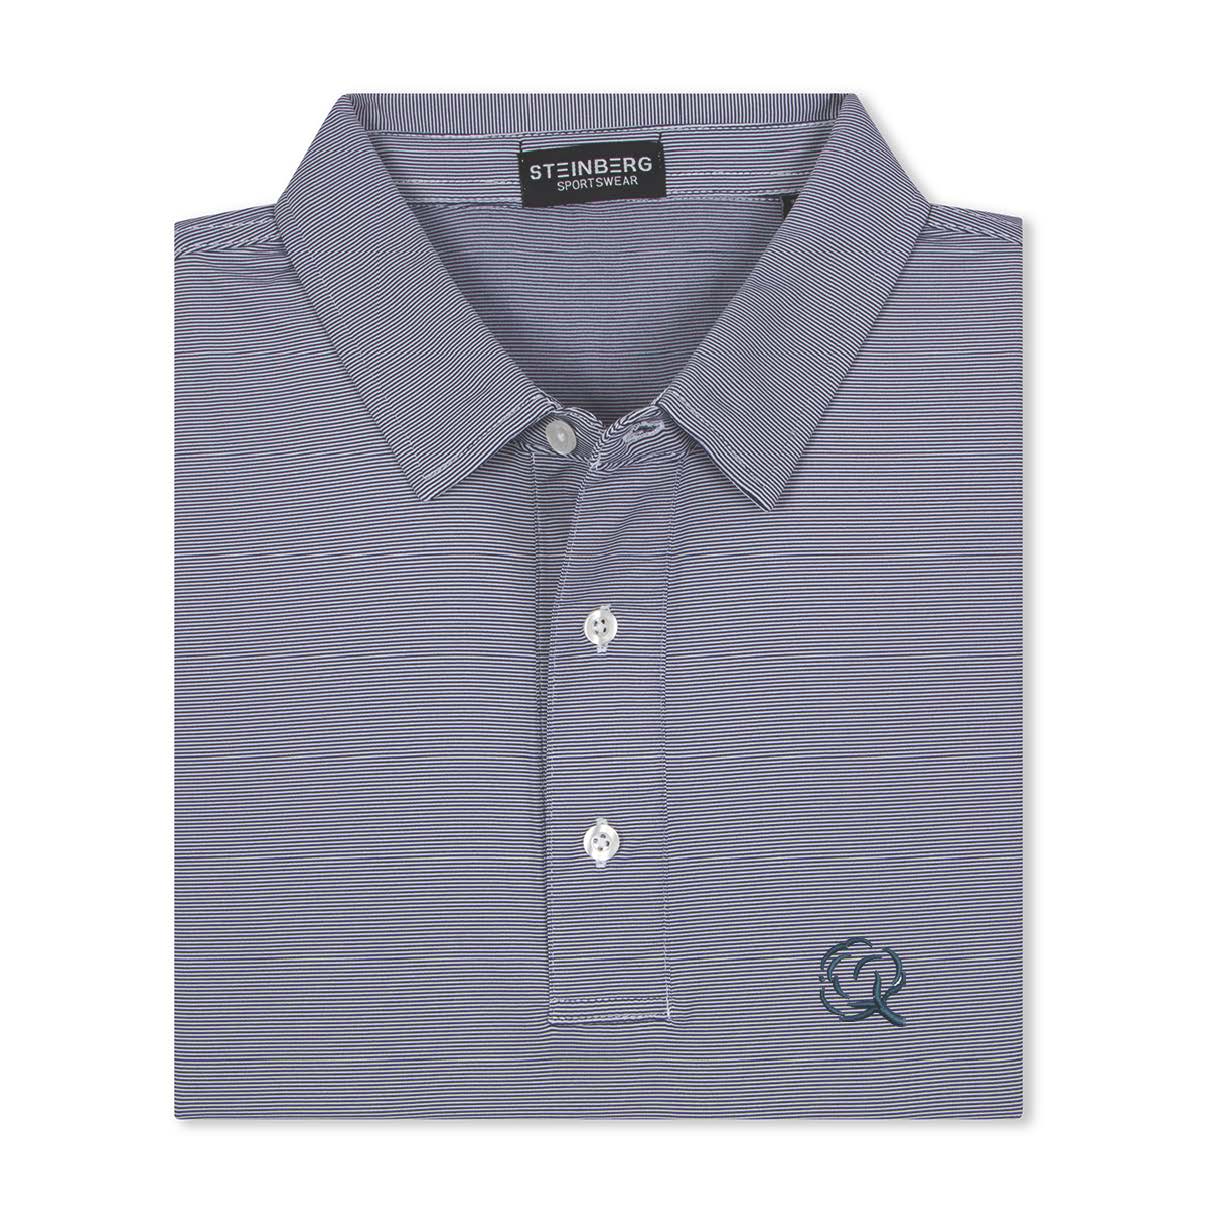 The Drained Performance Polo Cotton Collection